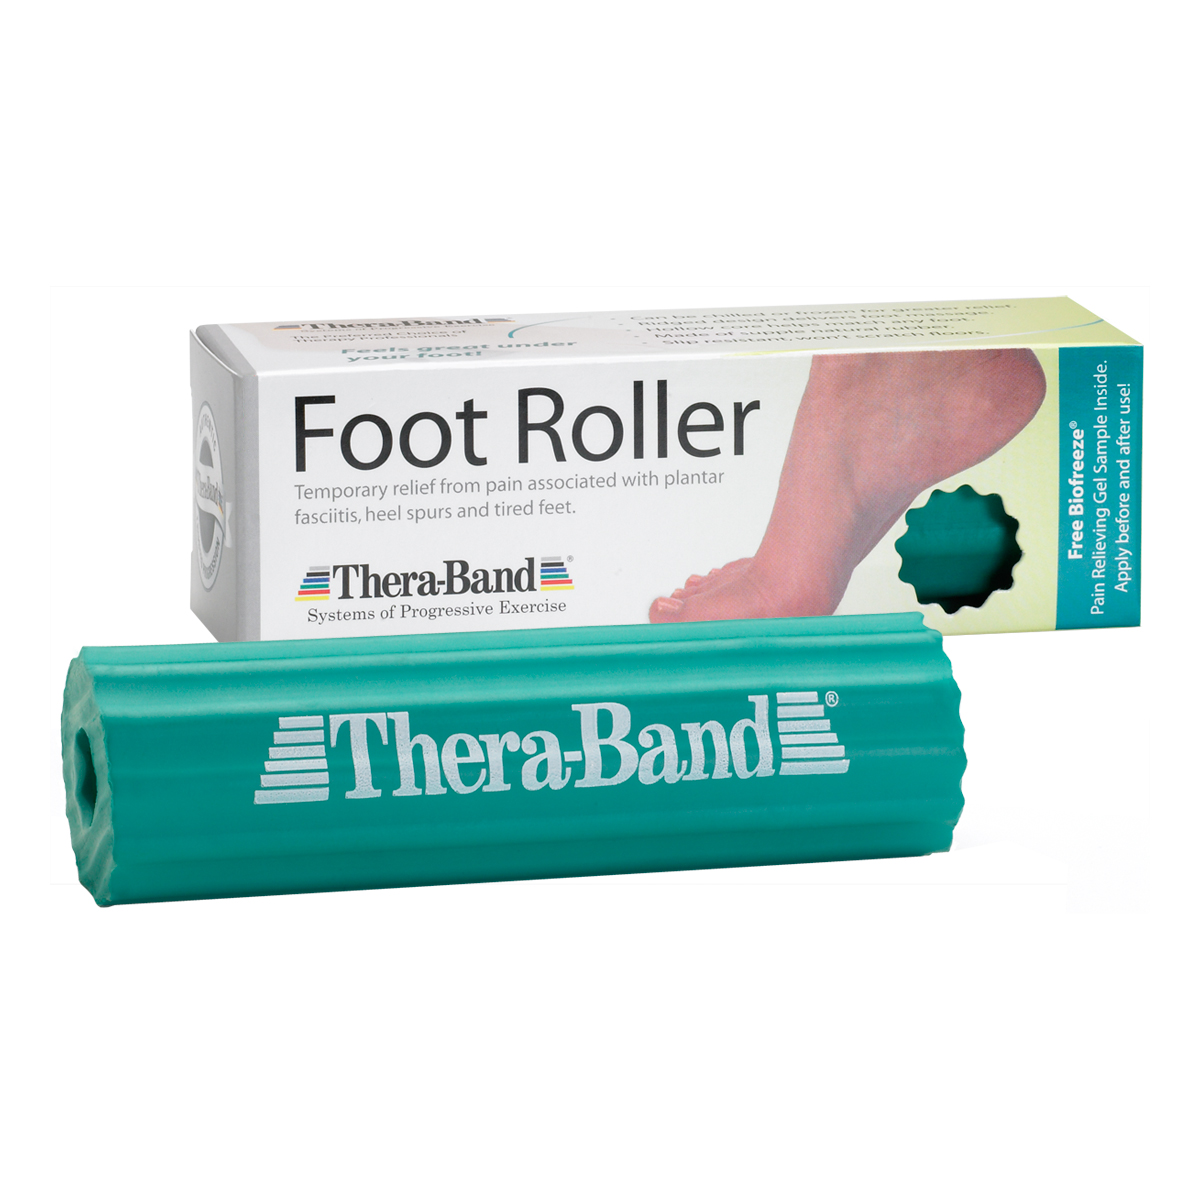 theraband-foot-roller